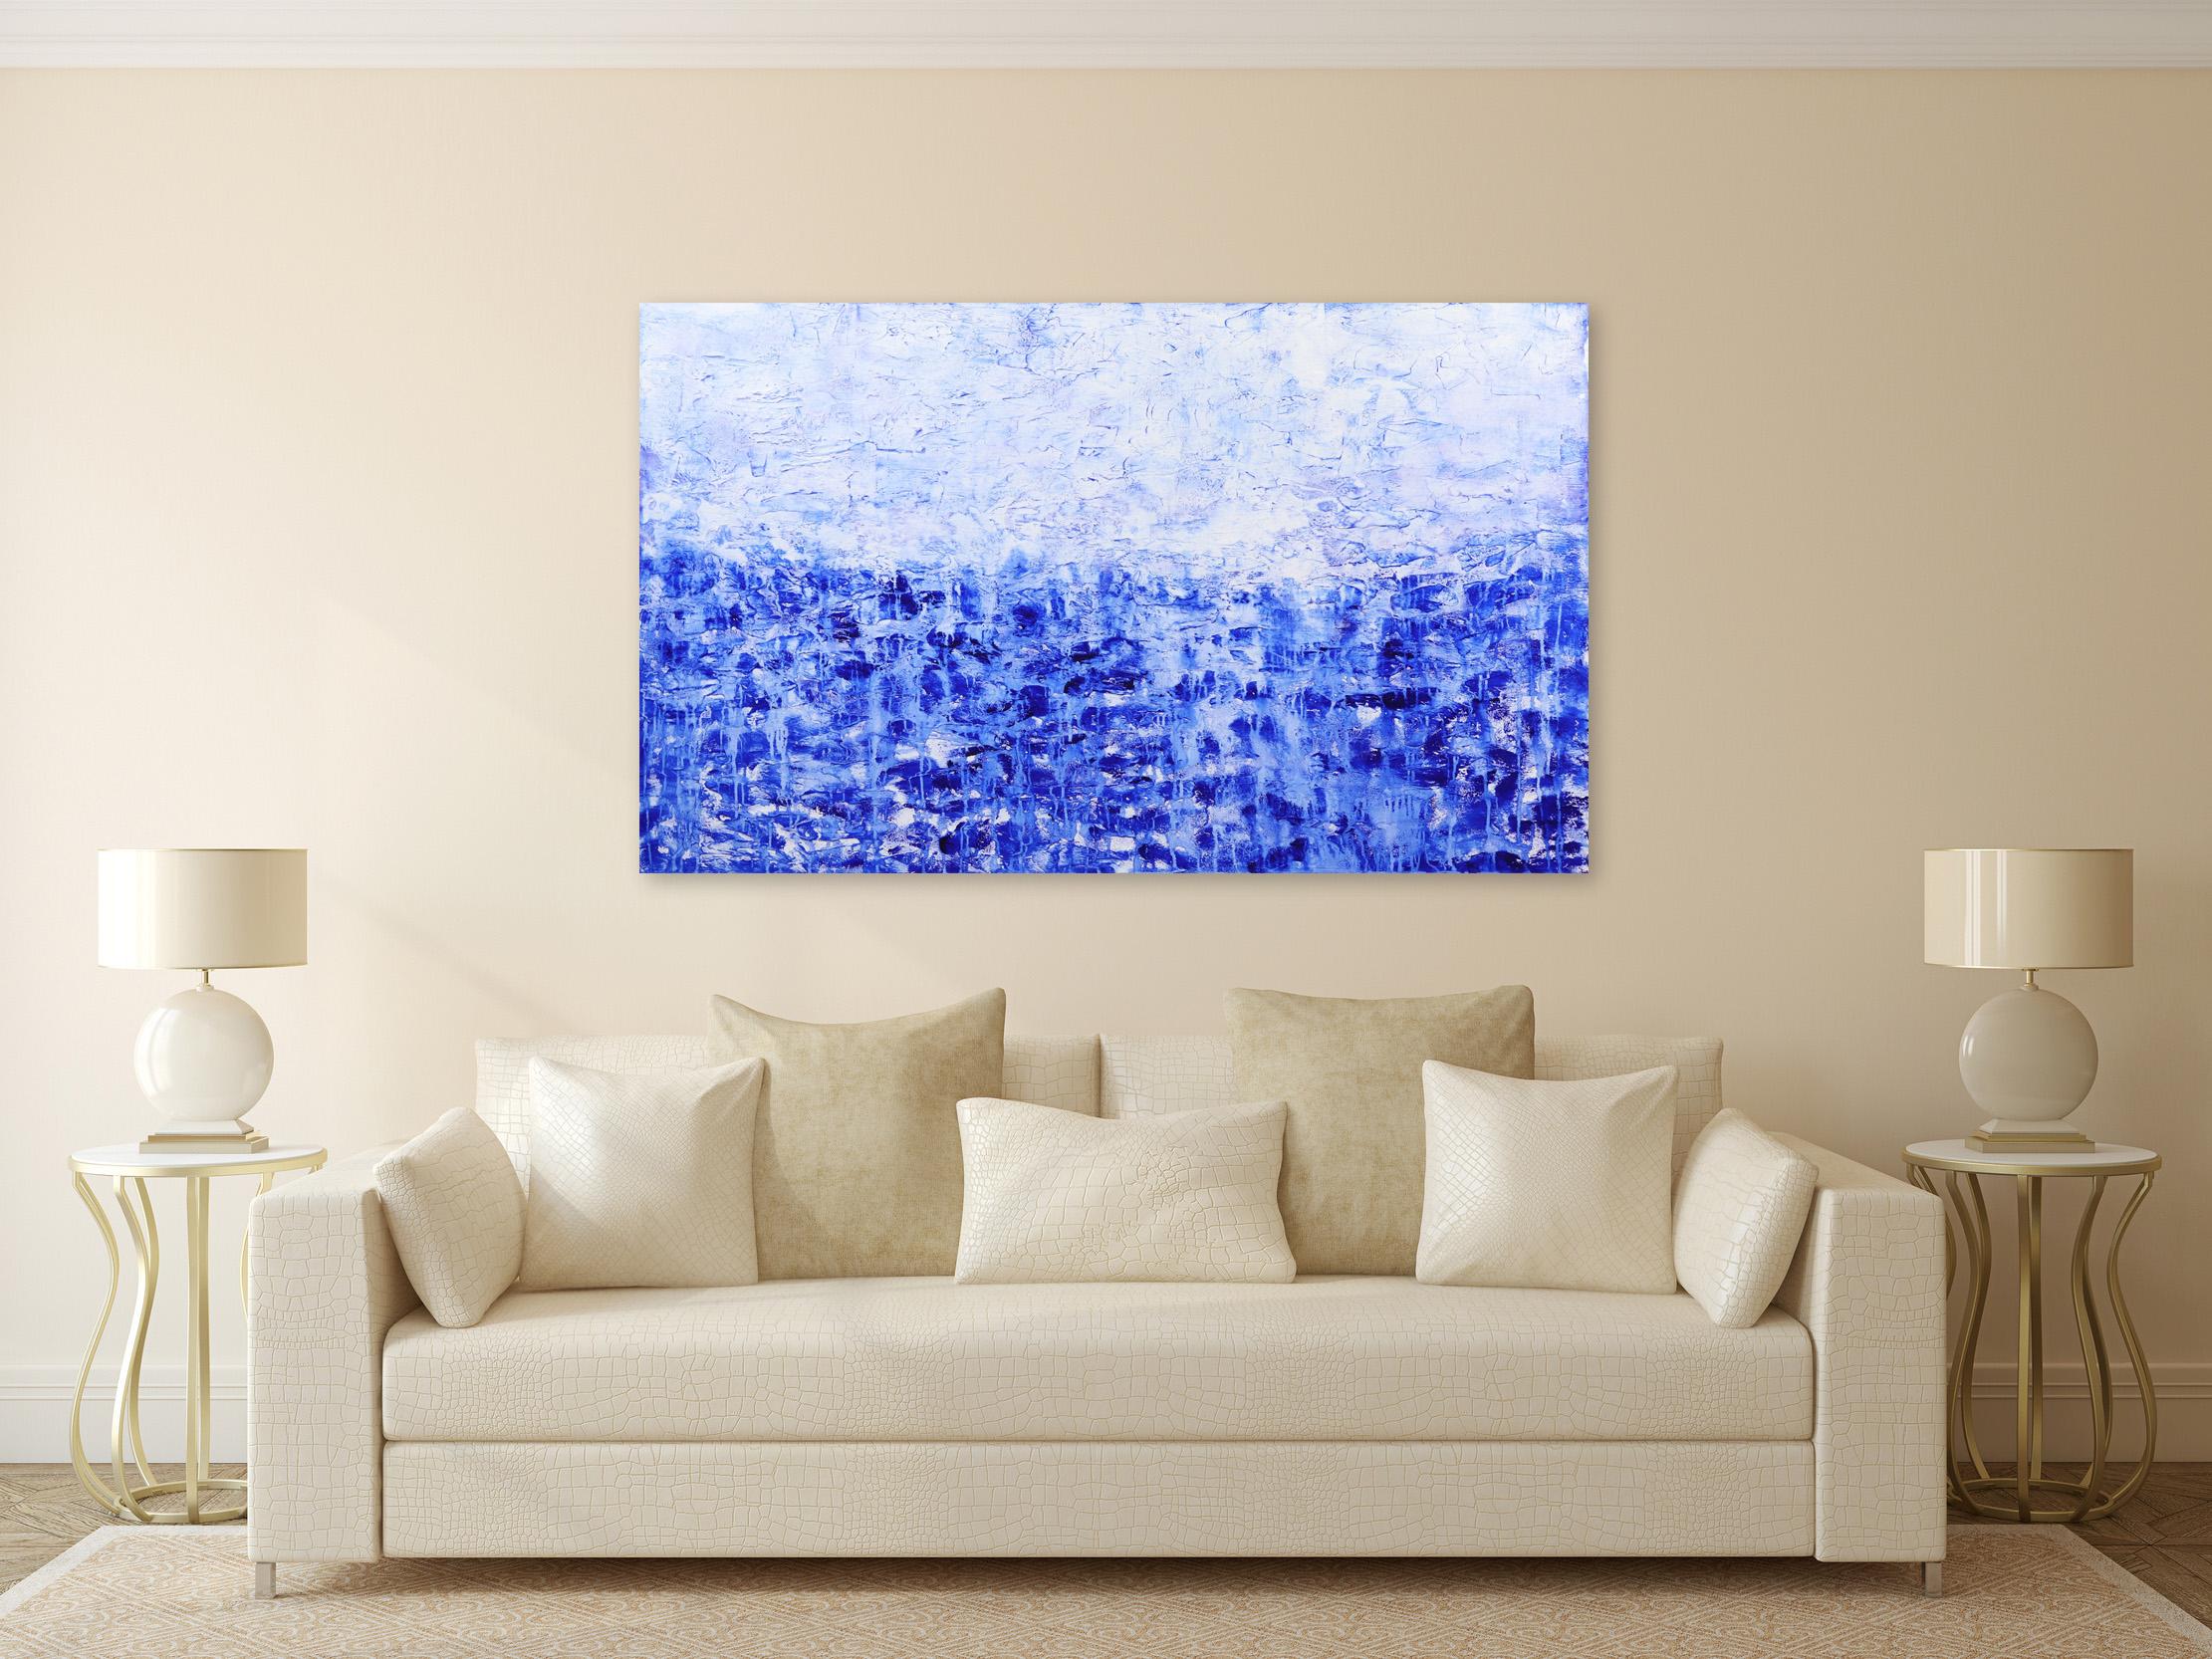 Clara Berta’s white and blue minimalist acrylic and mixed-media paintings blend texture and color to create harmony, mystery, and depth on the painted surface. Her abstract oceanscape paintings transform spaces into Zen environments where one can